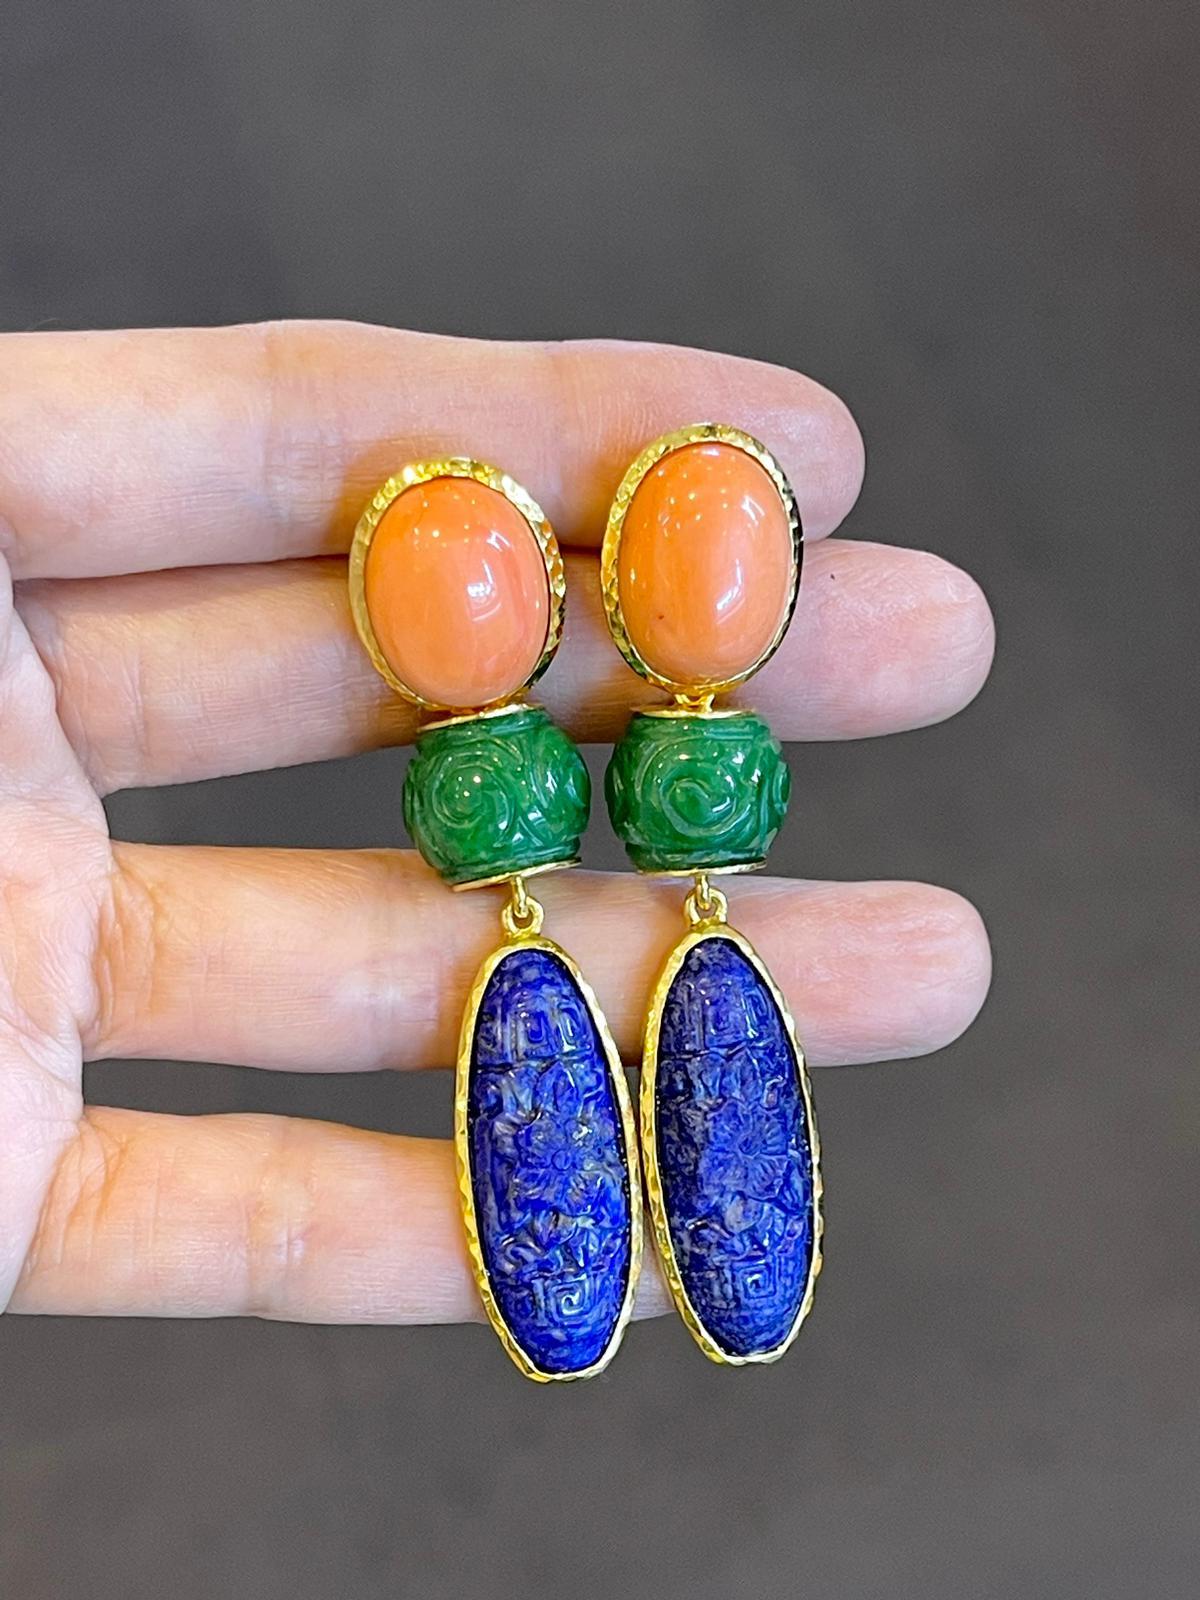 Bochic “Orient” Coral, Jade, Lapis set in 22K Gold & Silver 
Salmon pressed Coral 
Carved green Jade 
Lapis lazuli carved oval shape 
Set in 22K Gold and Silver 
This earrings are the perfect cross between fashion jewlery to fine jewlery
Day to